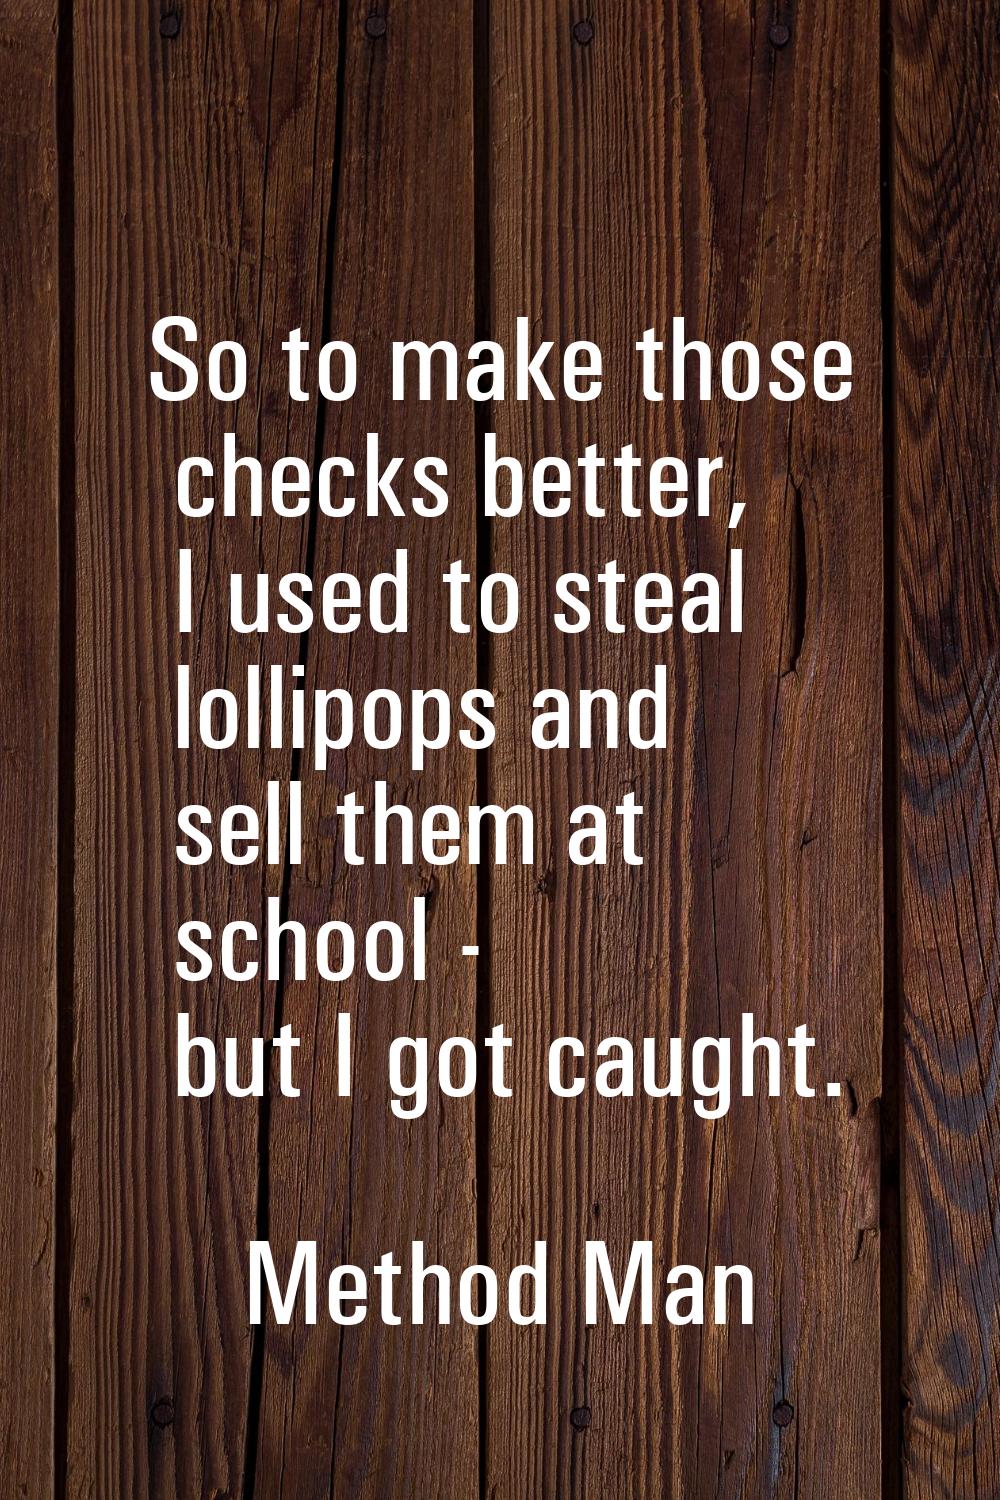 So to make those checks better, I used to steal lollipops and sell them at school - but I got caugh